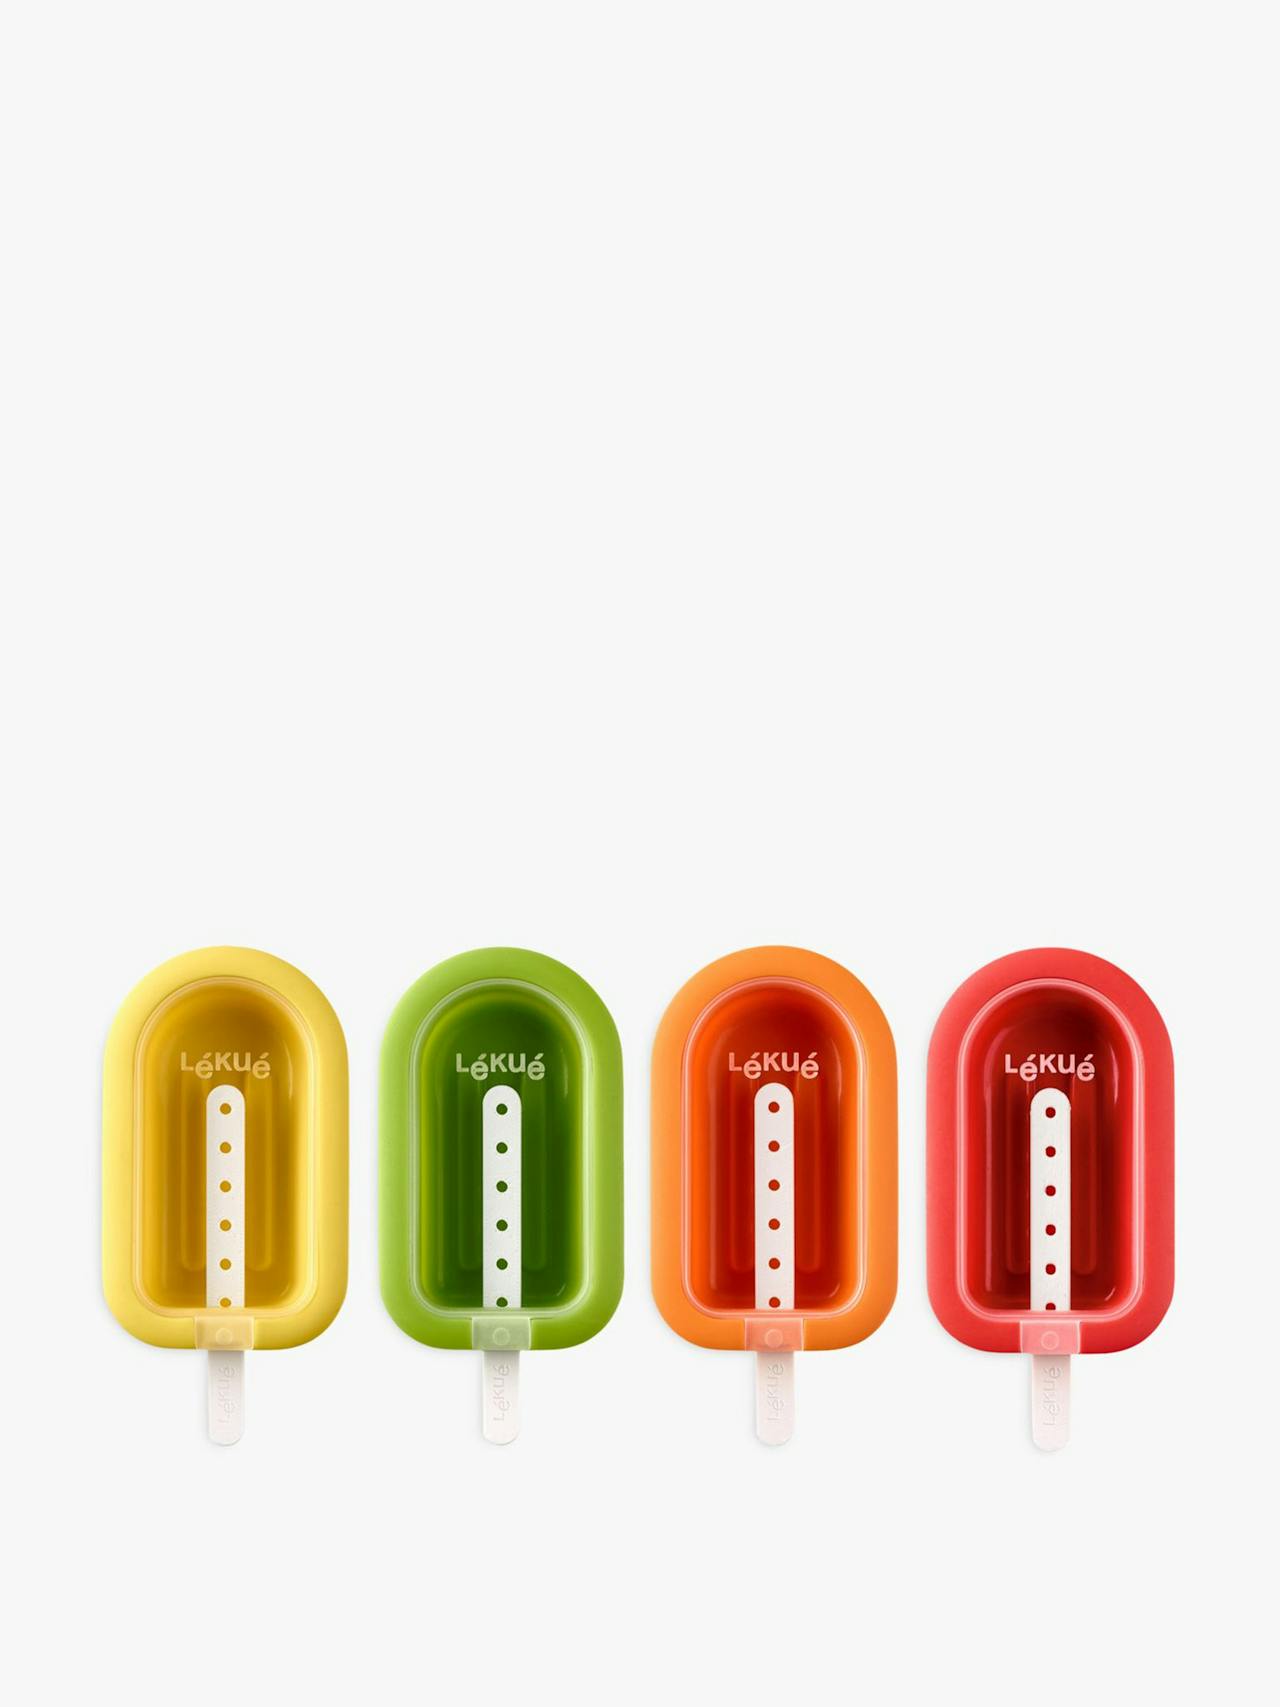 Classic popsicle ice lolly moulds